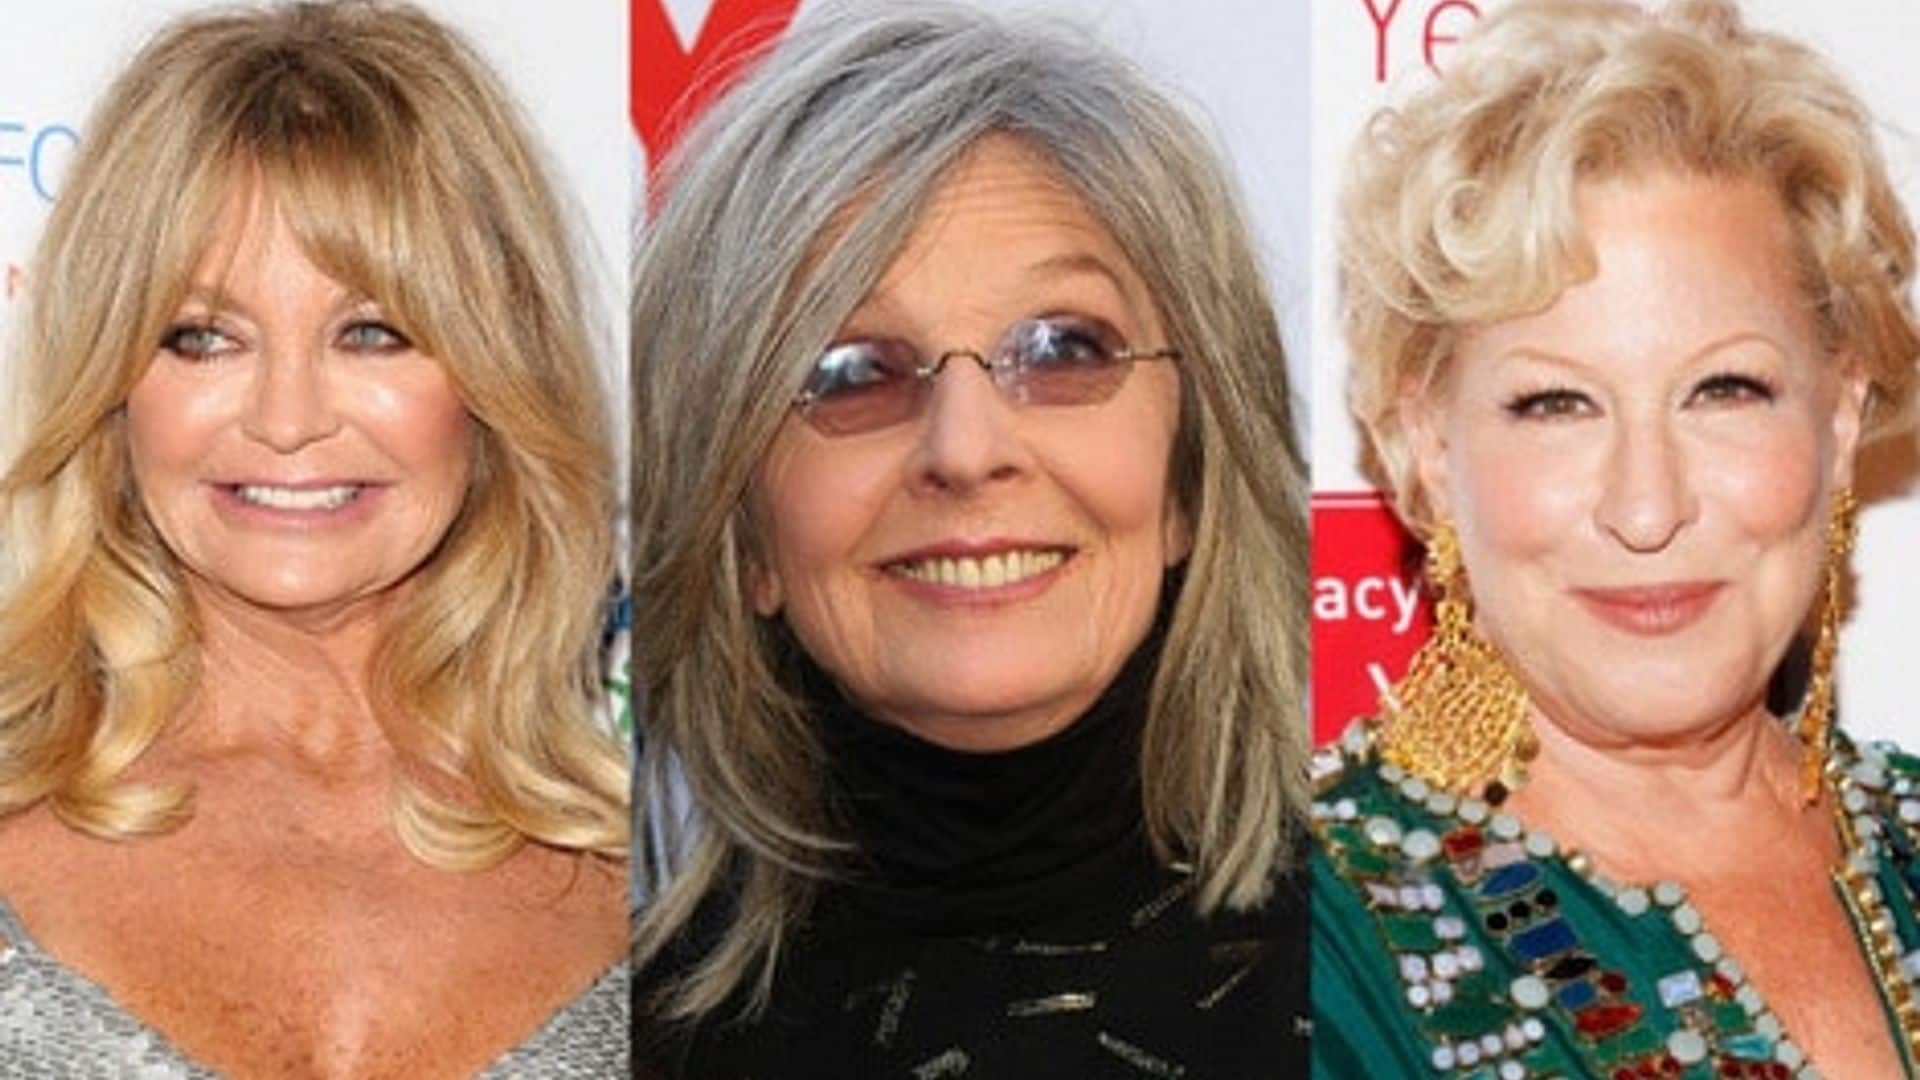 'First Wives Club' stars Goldie Hawn, Diane Keaton and Bette Midler reuniting for Netflix film